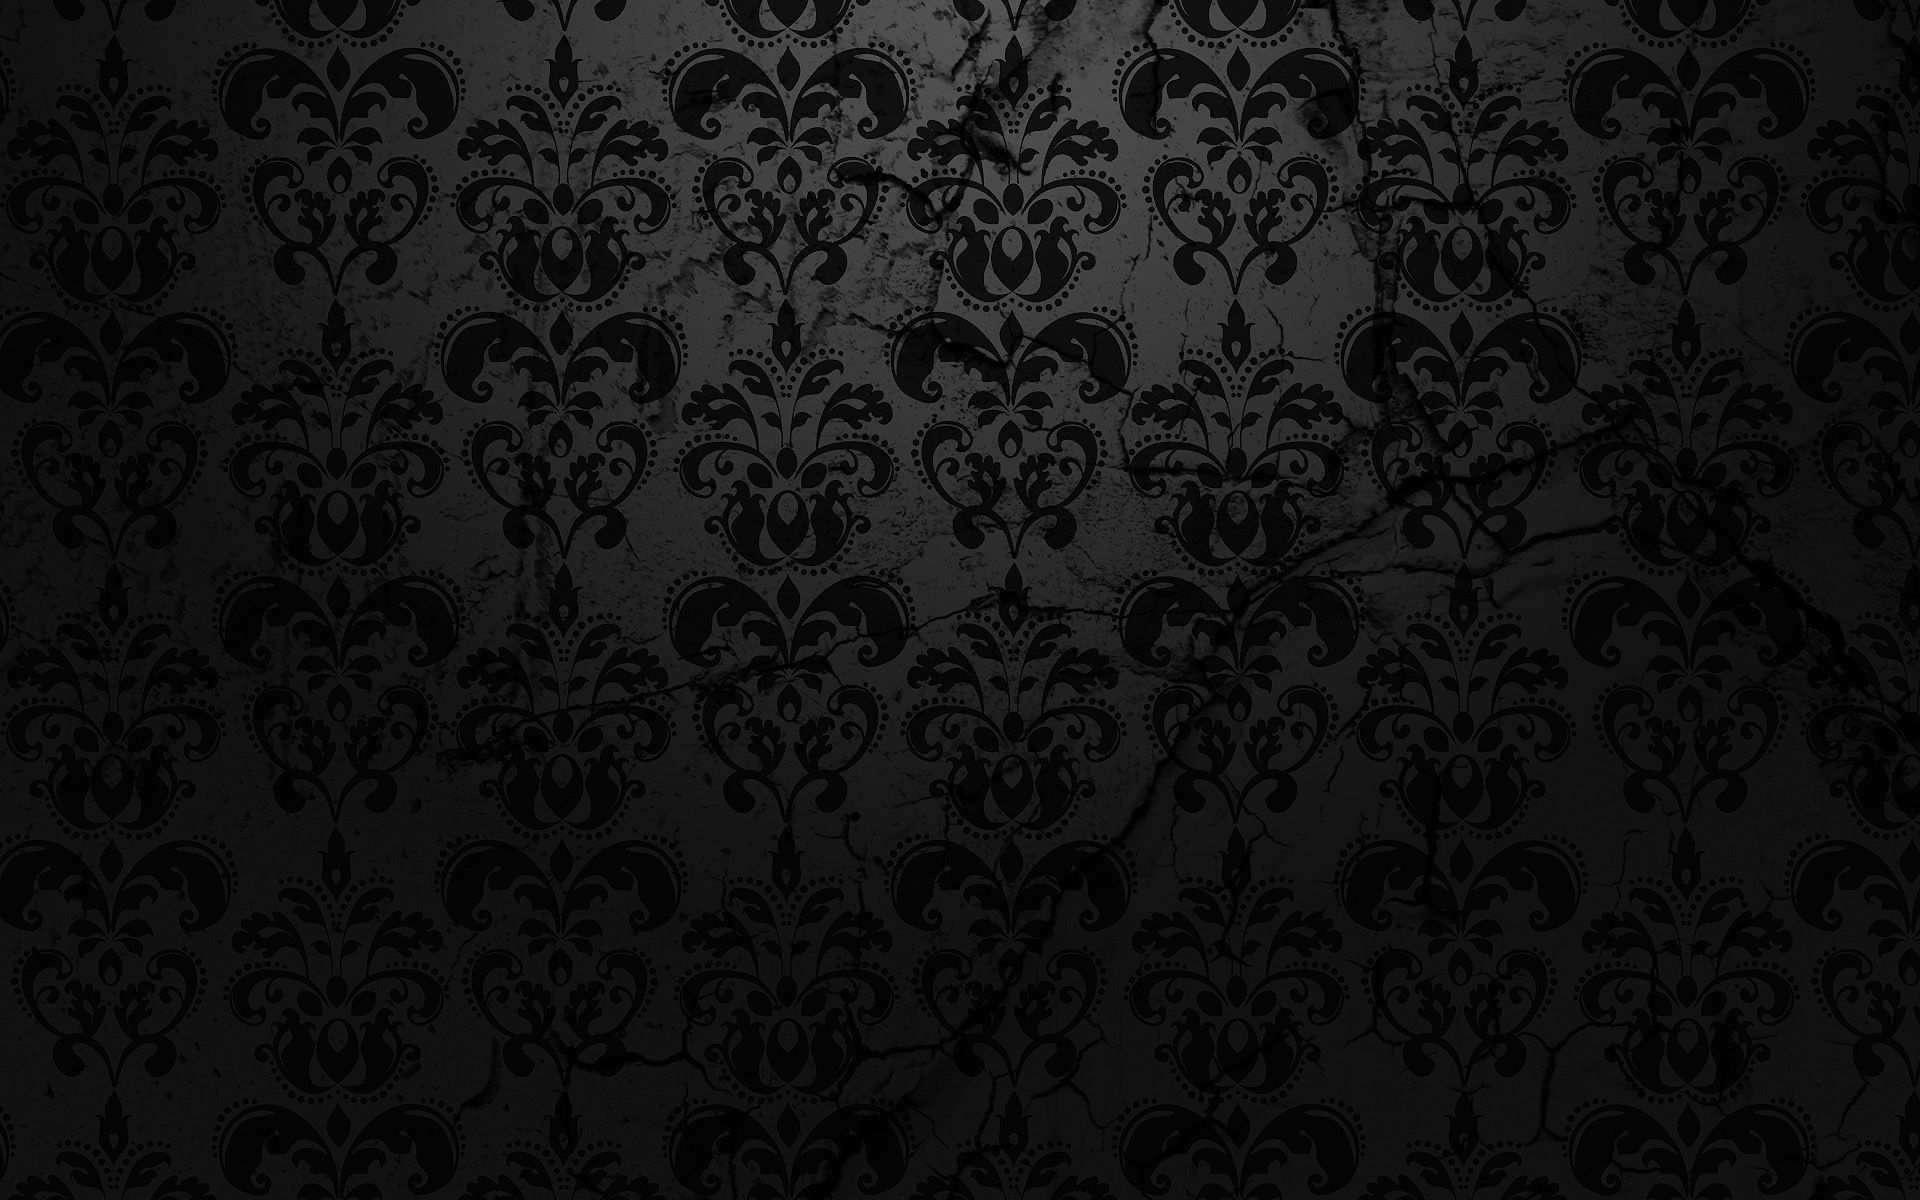 Cool Black On Damask Textured Wallpaper 1920x1200px